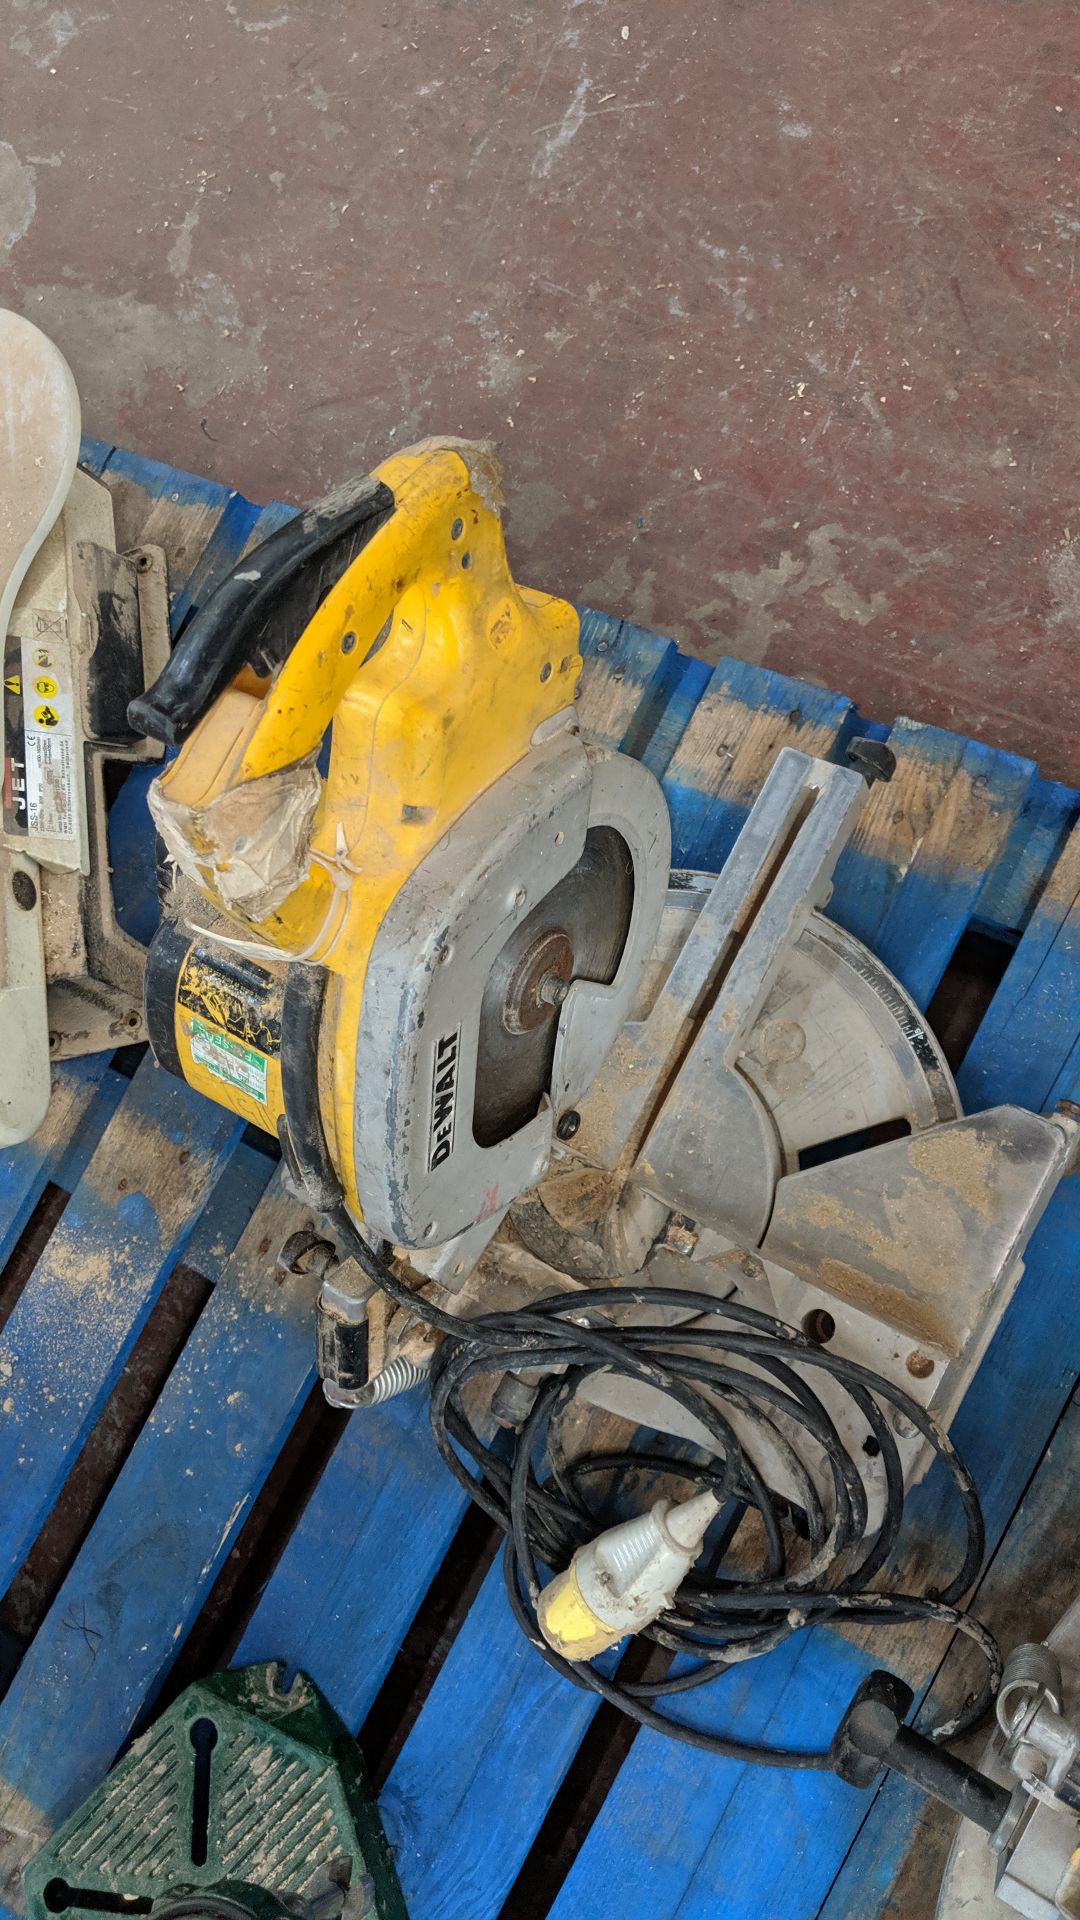 DeWalt 110V mitre saw IMPORTANT: Please remember goods successfully bid upon must be paid for and - Image 3 of 5